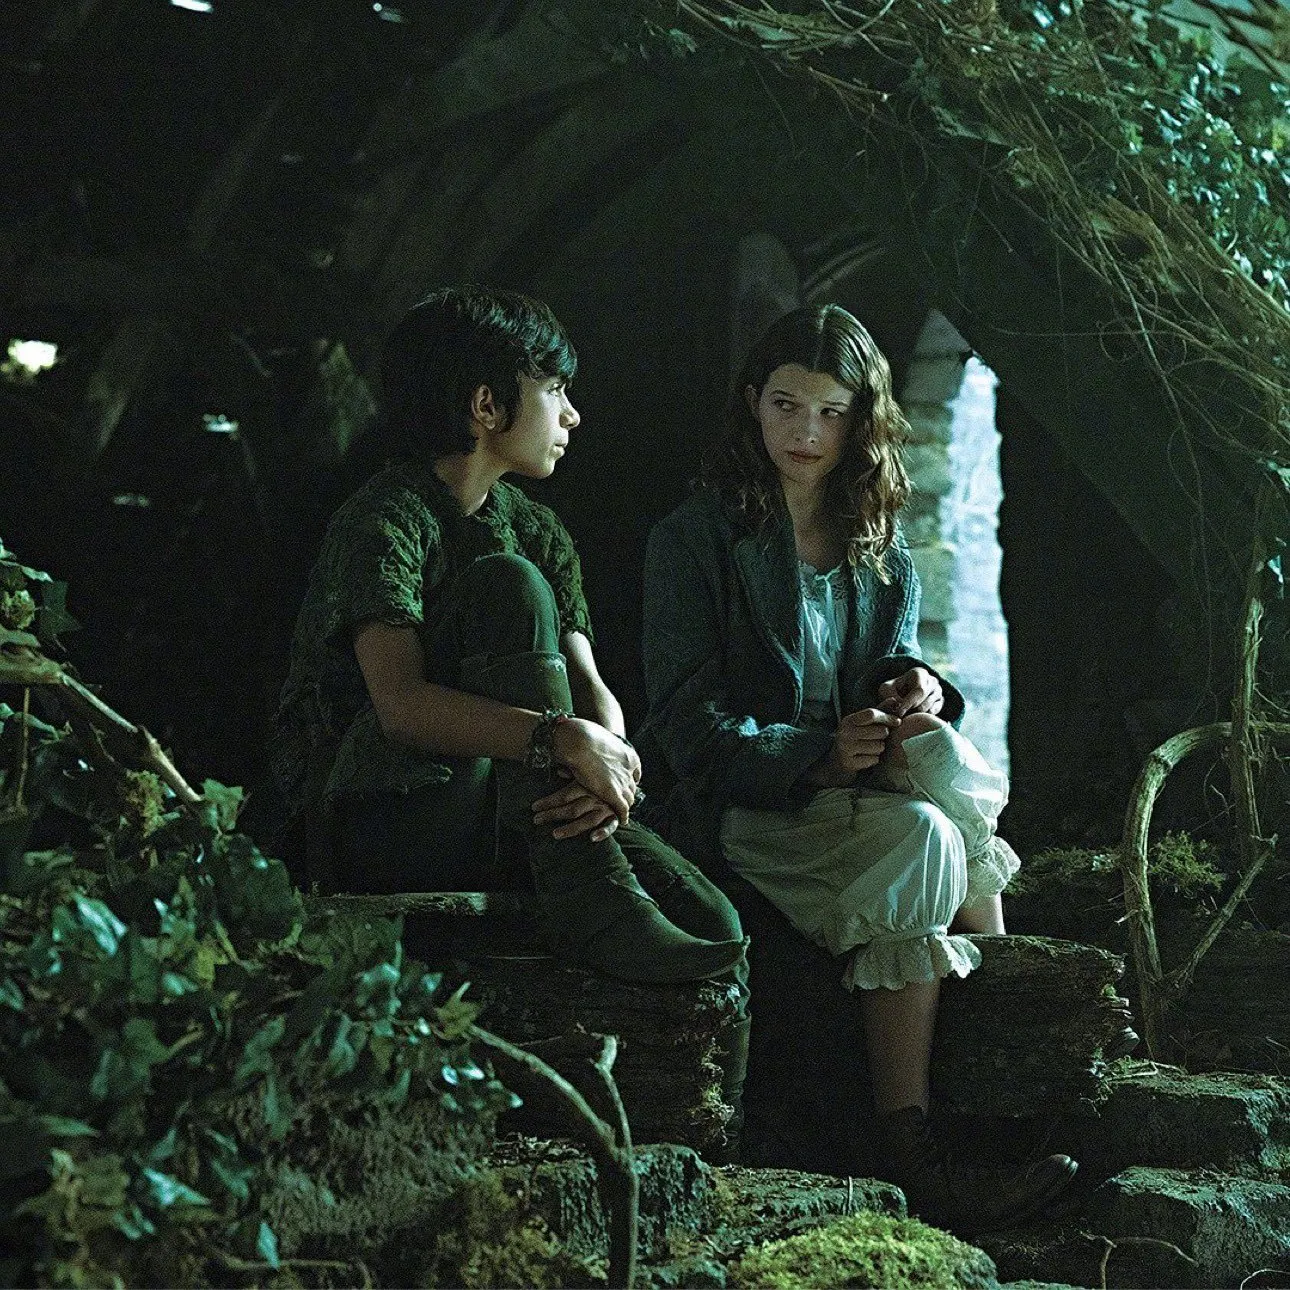 Tinker BellDisney's new movie 'Peter Pan & Wendy‎' has exposed new stills and will be launched on Disney+ | FMV6